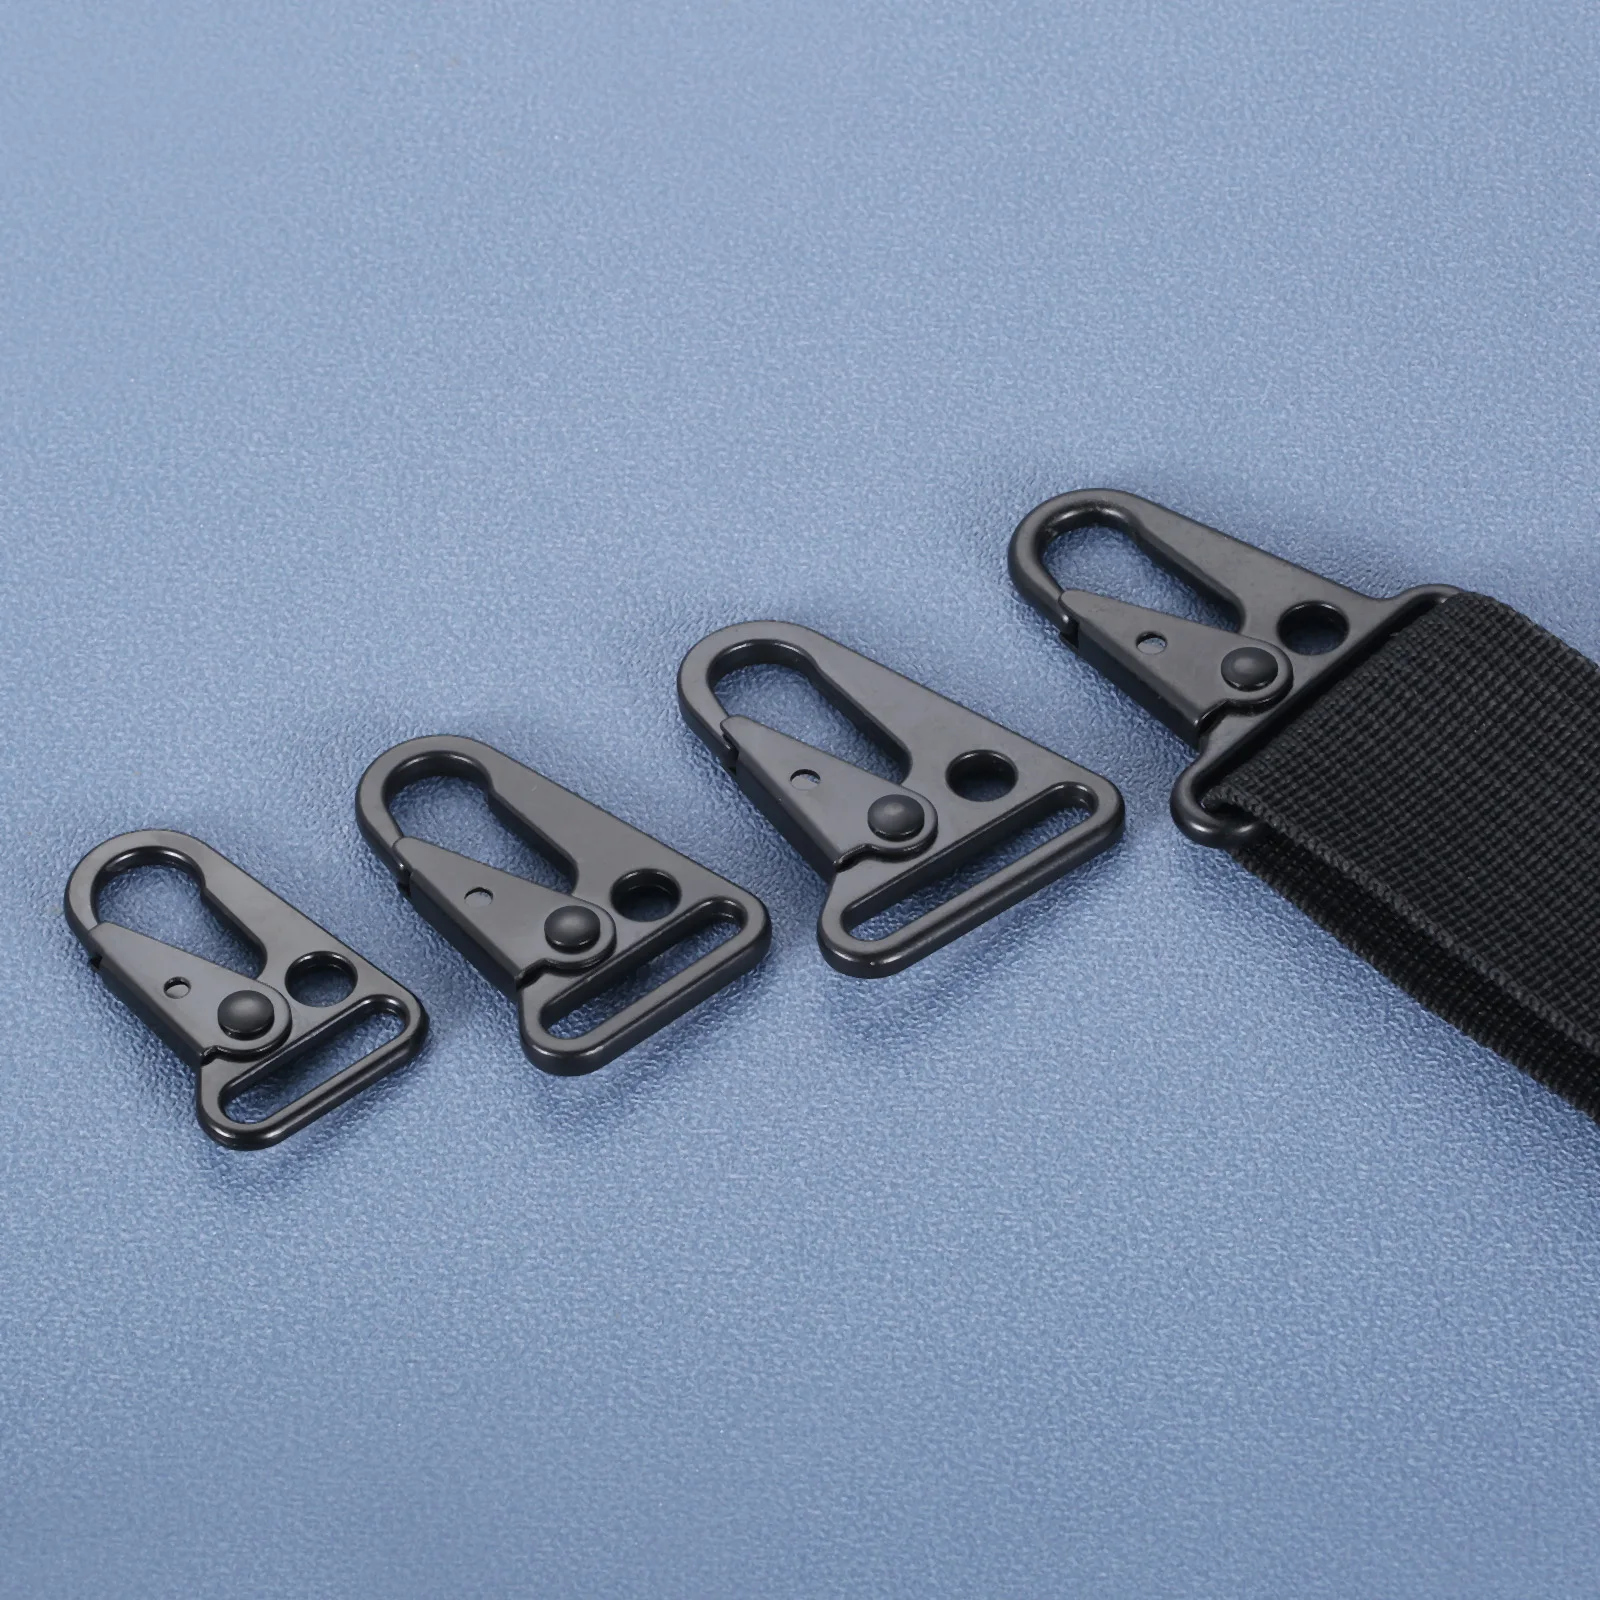 

4pcs Webbing Hook Carabiners Sling Clip Spring Snap Hanger attachable Belt Metal Multi-Functional Camping Hiking Outdoor EDC